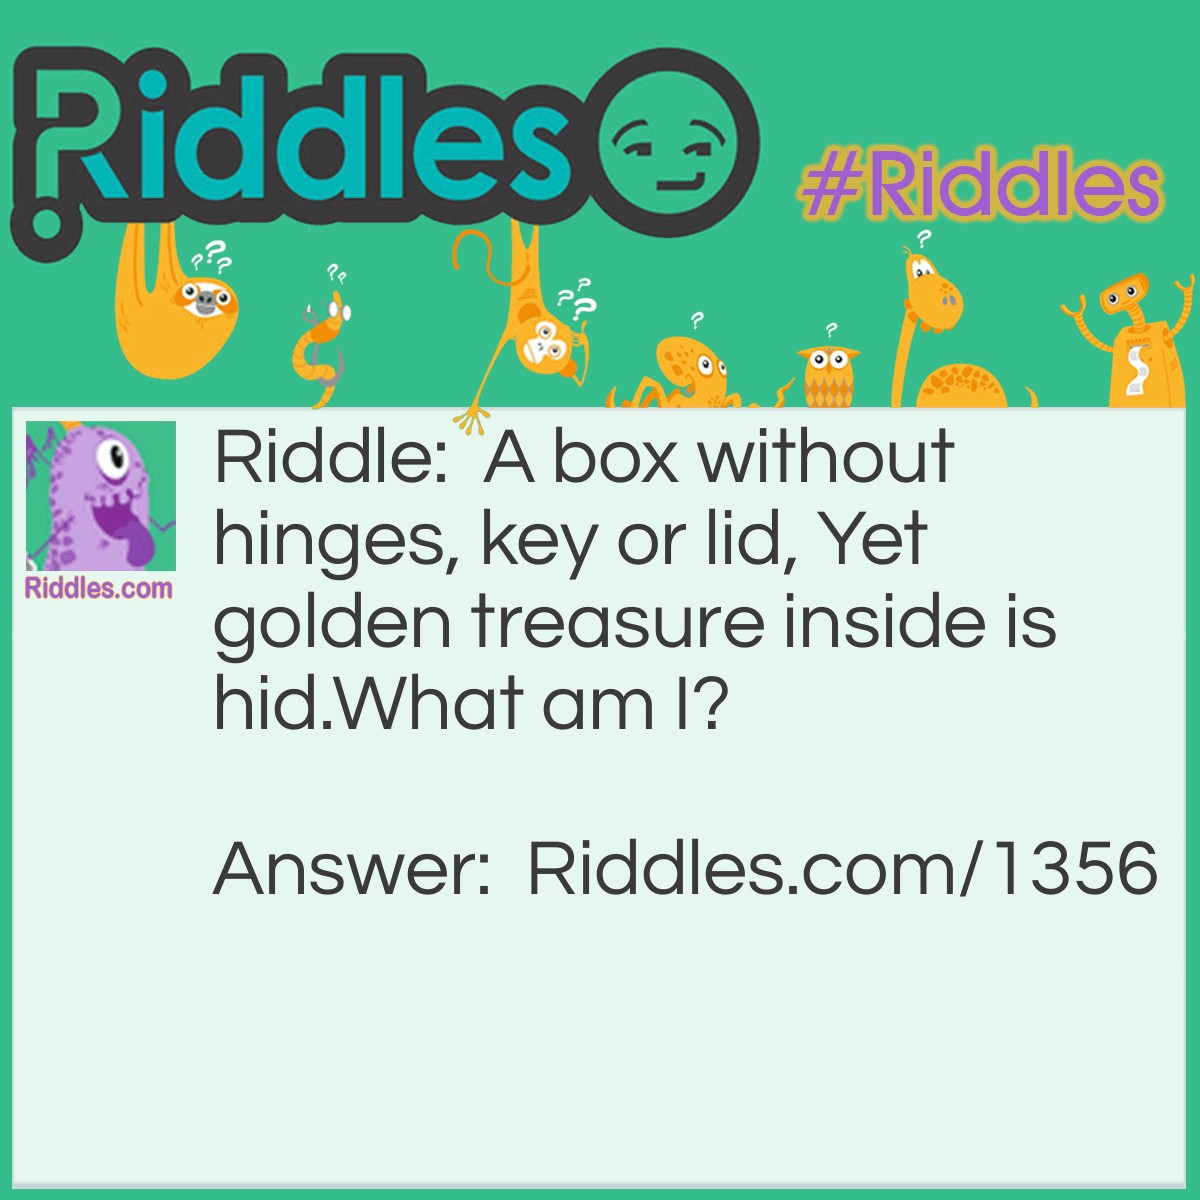 Riddle: A box without hinges, key or lid, Yet golden treasure inside is hid.
What am I? Answer: An egg.